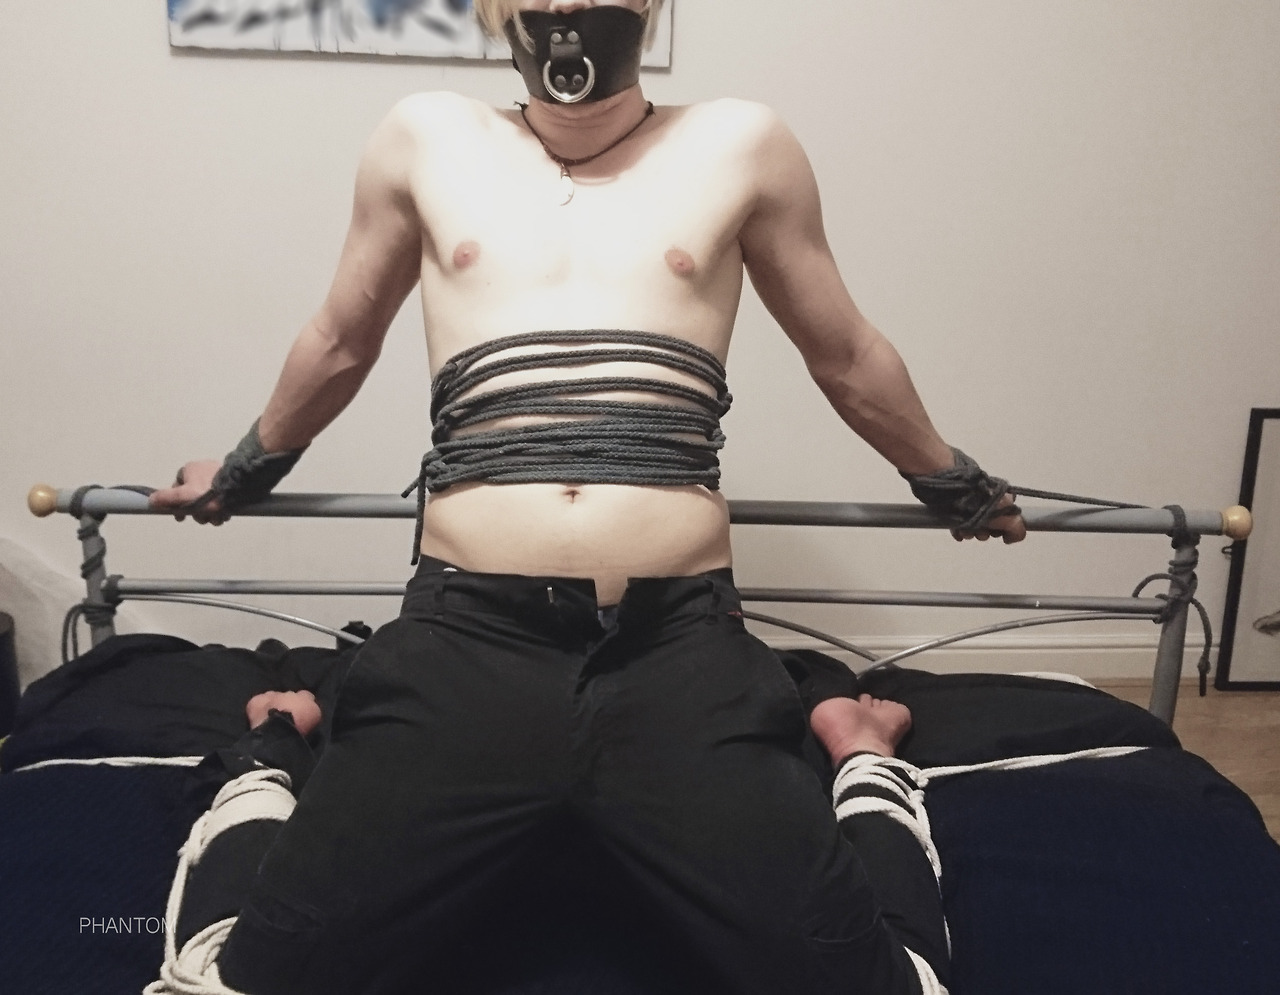 phantombondage:All Boys are meant to be broken…